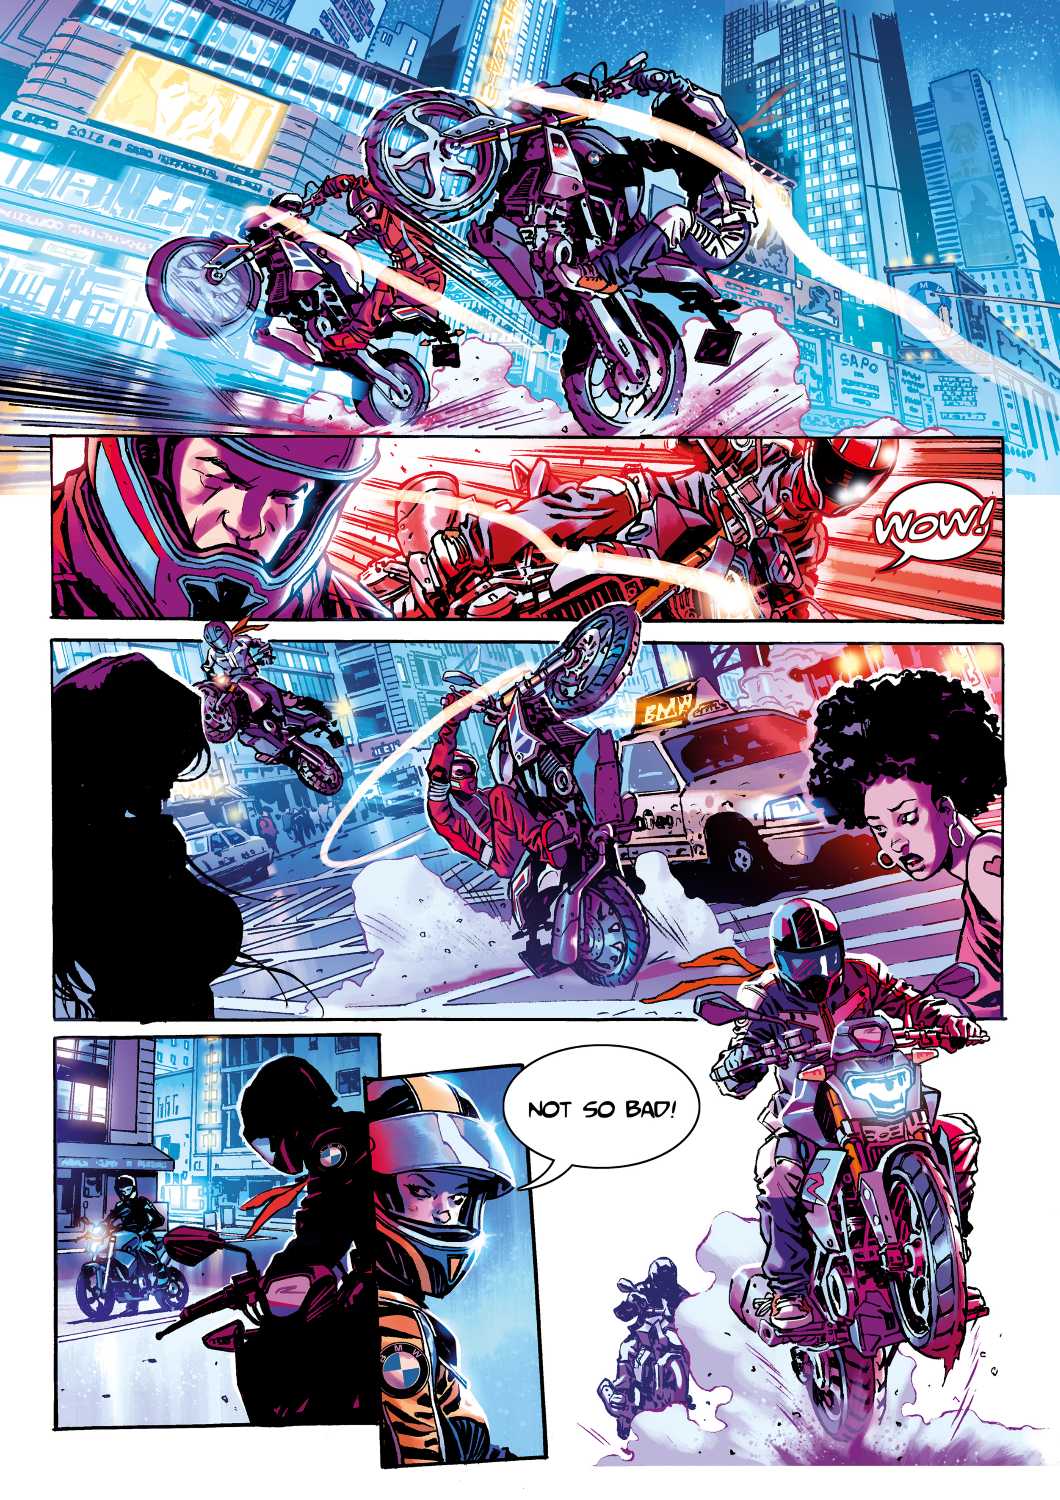 Riders in the Storm. BMW Motorrad presents its first graphic novel at Comic Con Germany